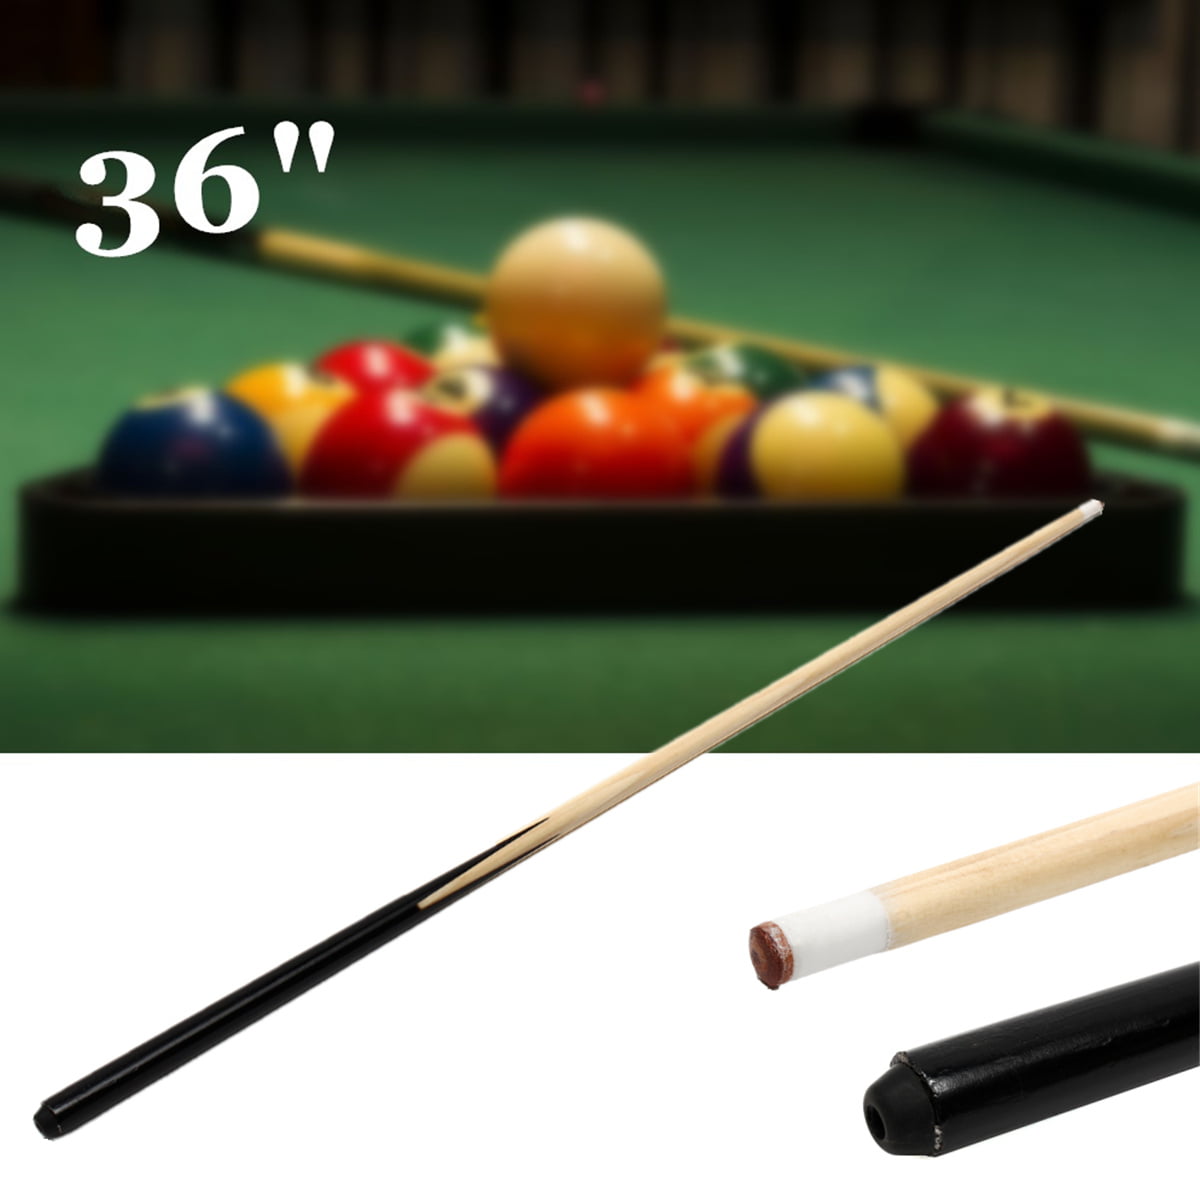 57'' Wooden Pool Snooker 2-Piece Jointed Cue Stick Billiard Game Rack Club Gift 